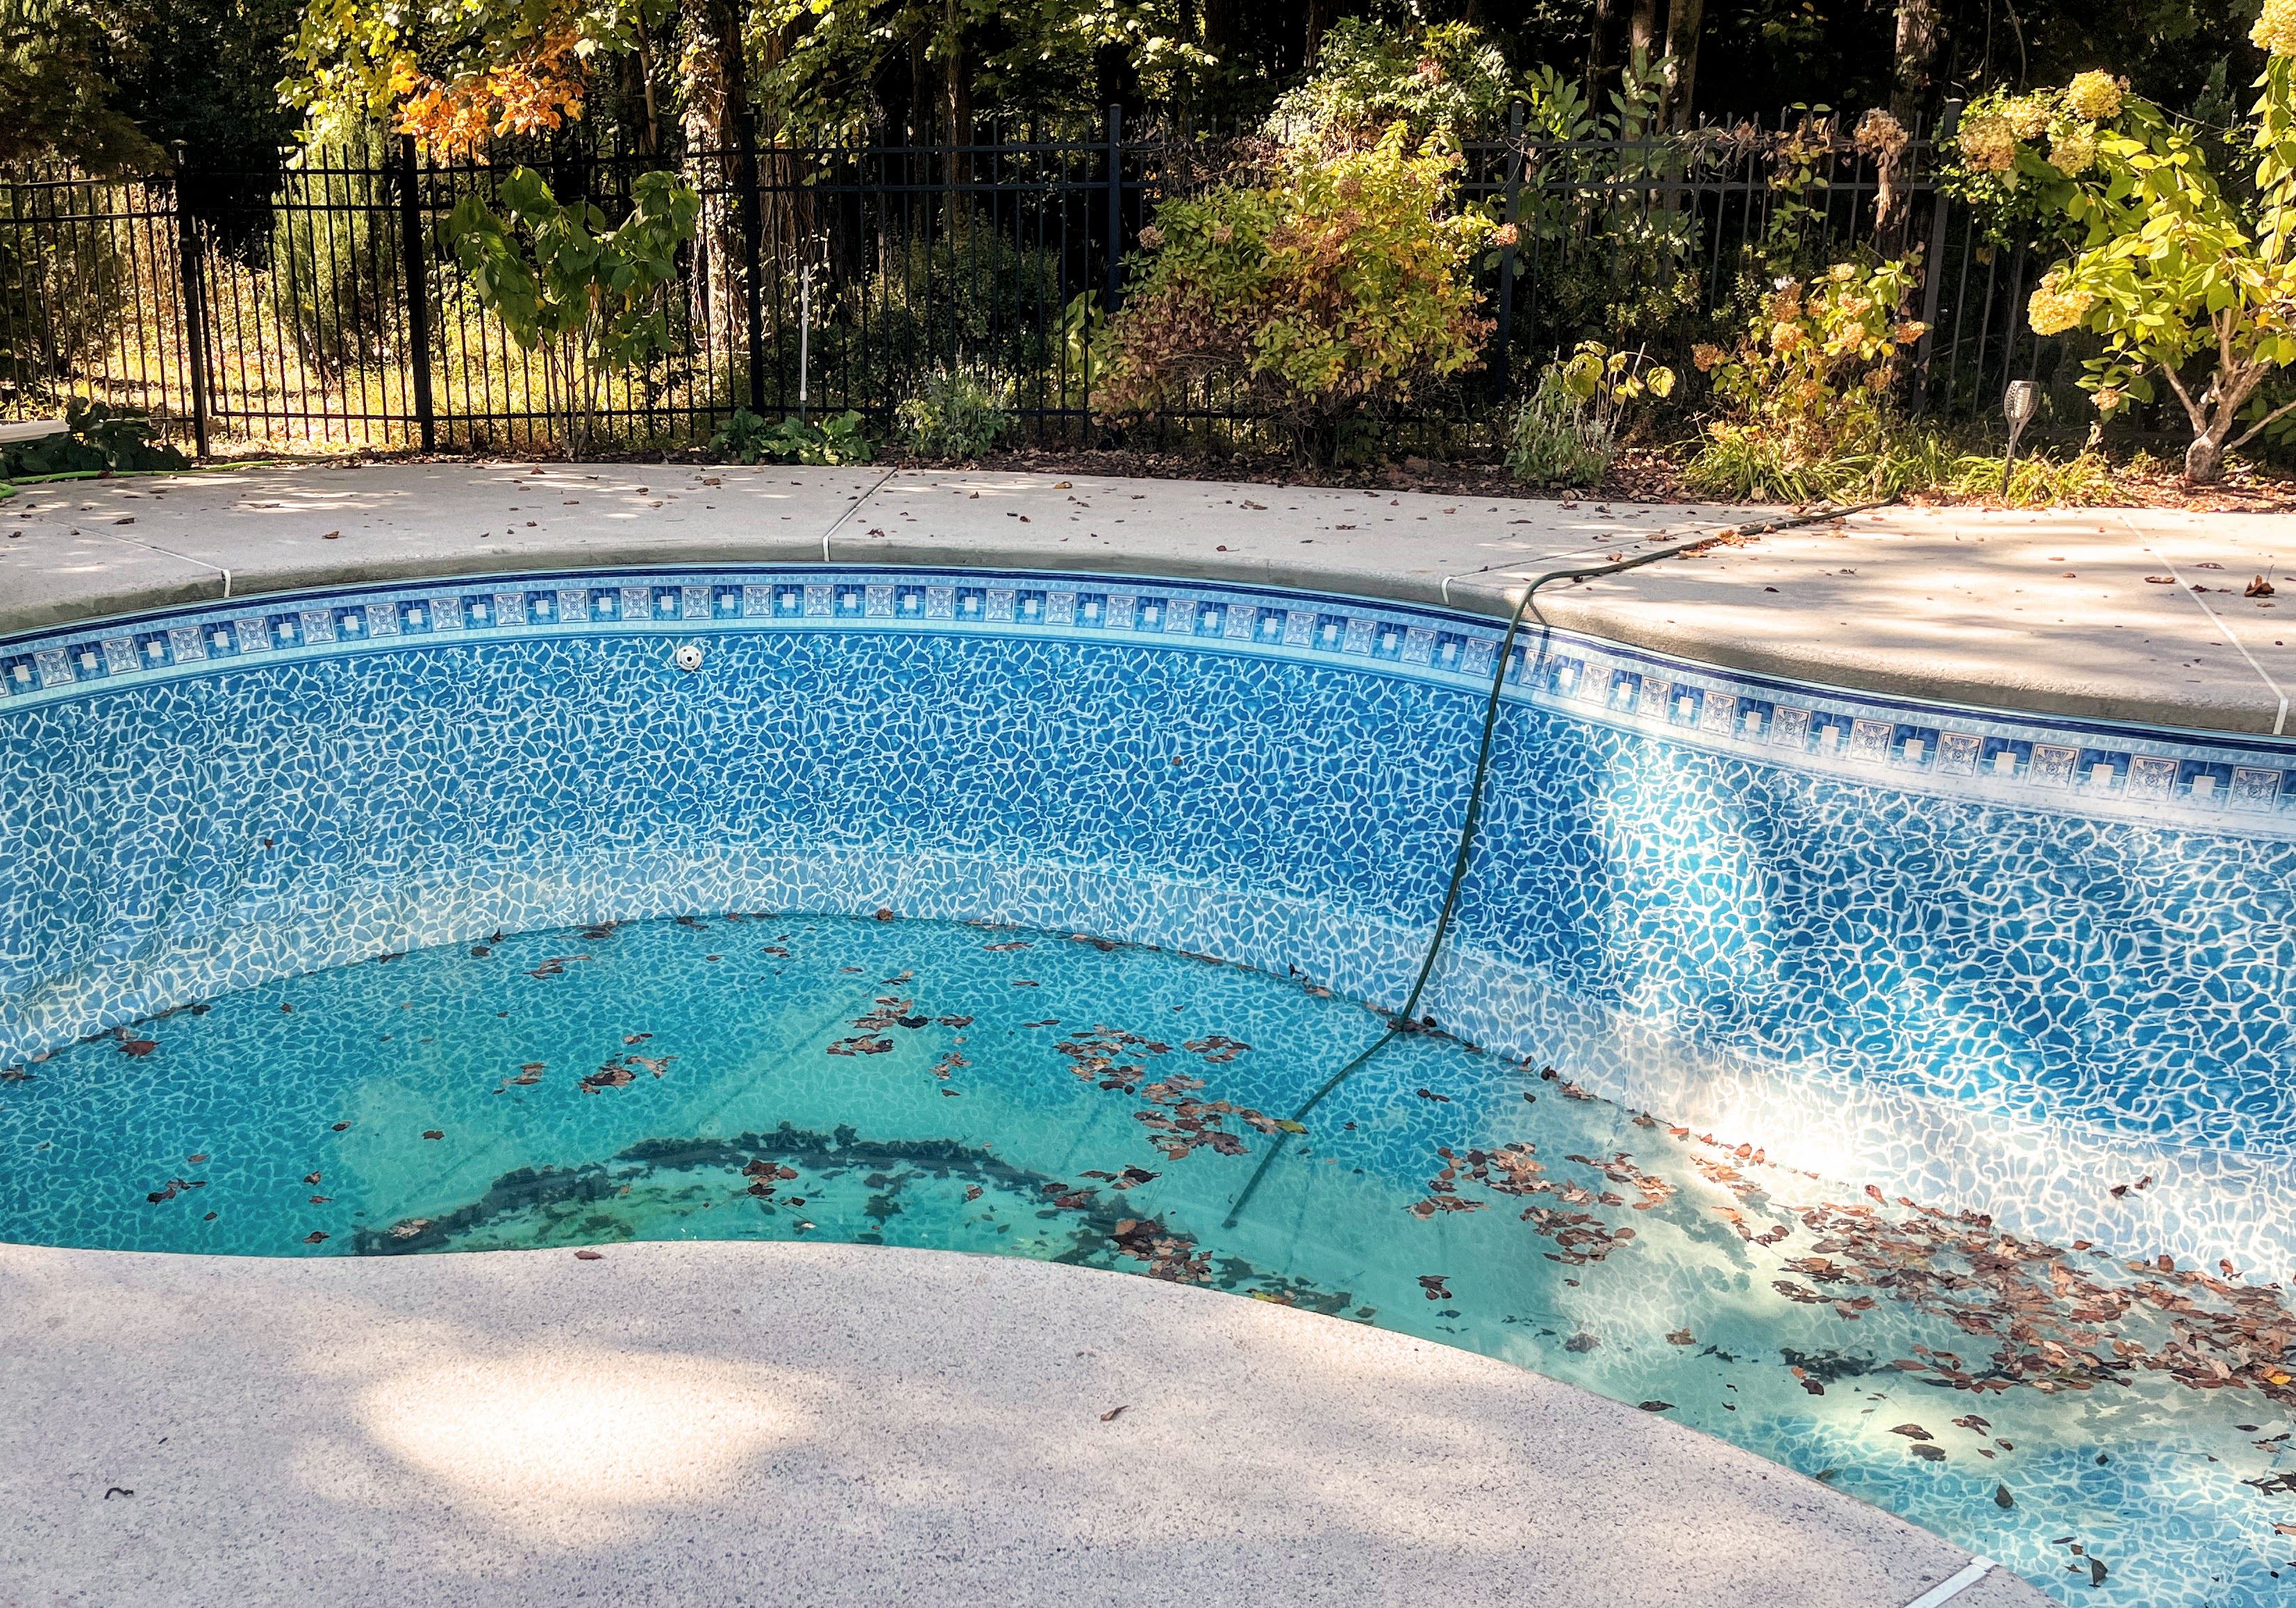 steps to replacing a pool liner